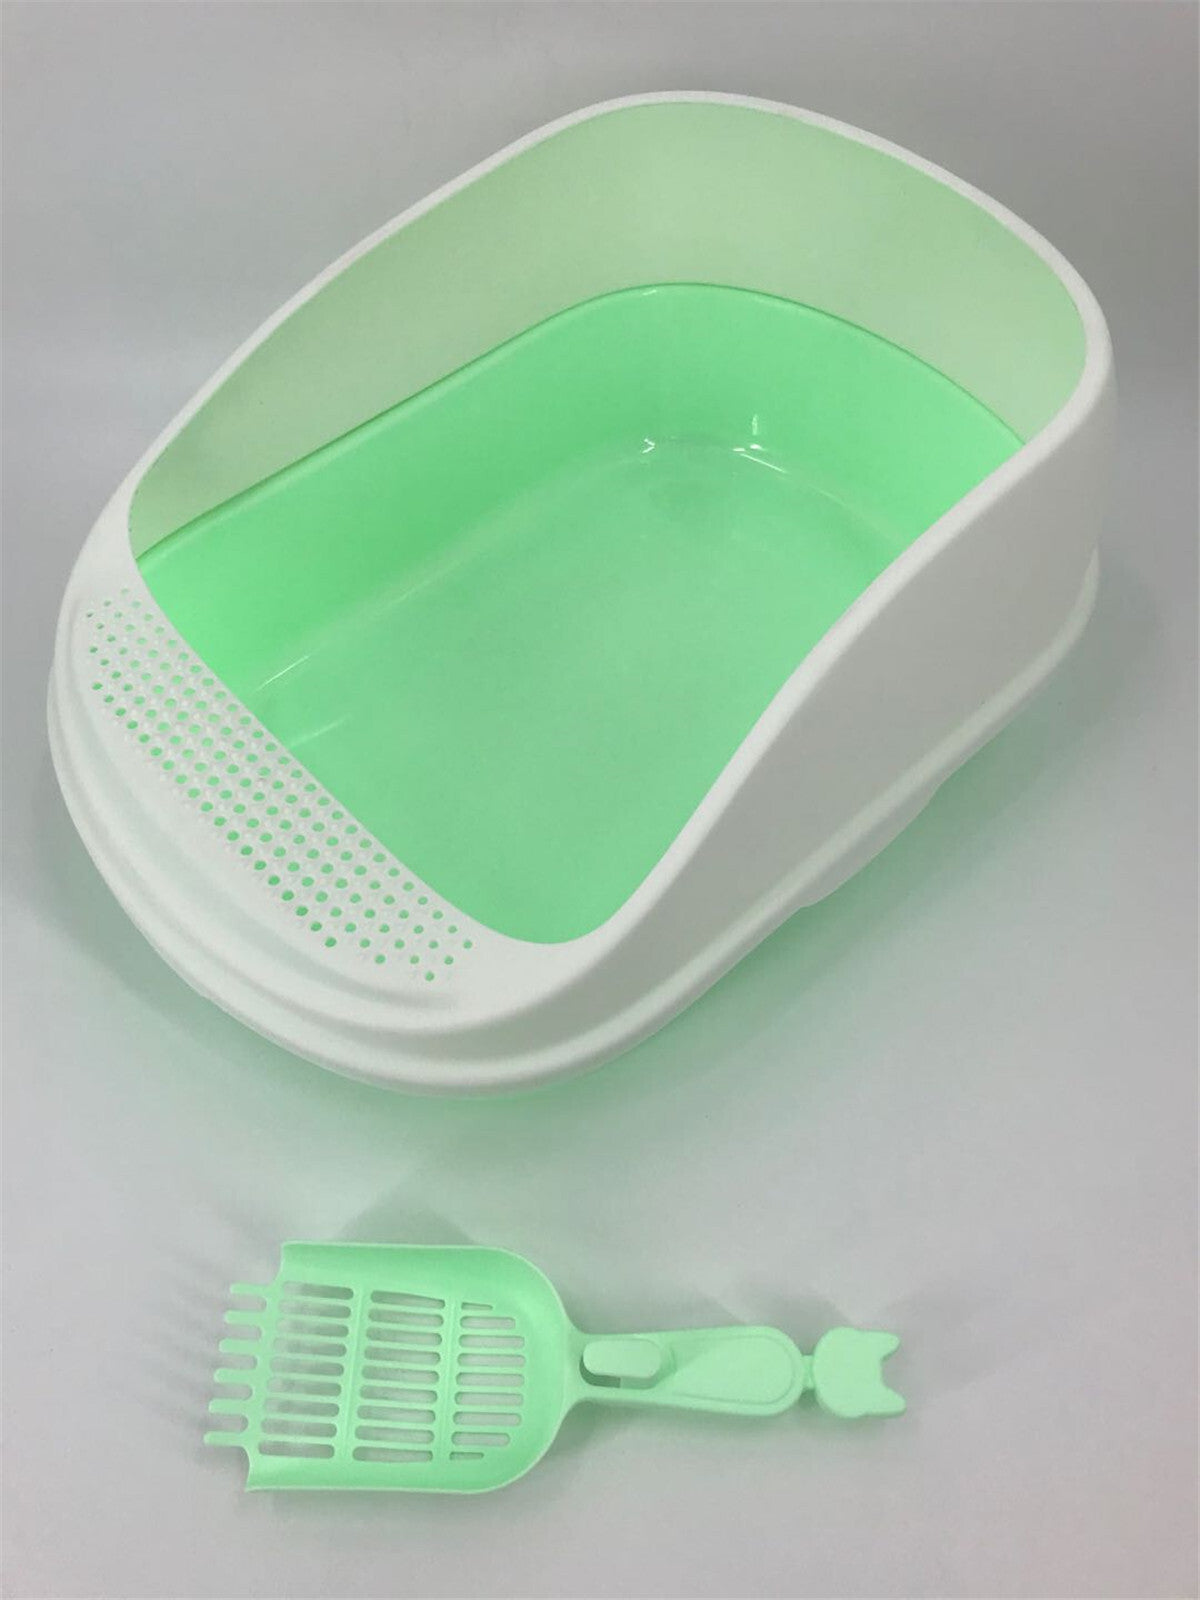 YES4PETS Large Portable Cat Toilet Litter Box Tray House with Scoop Green